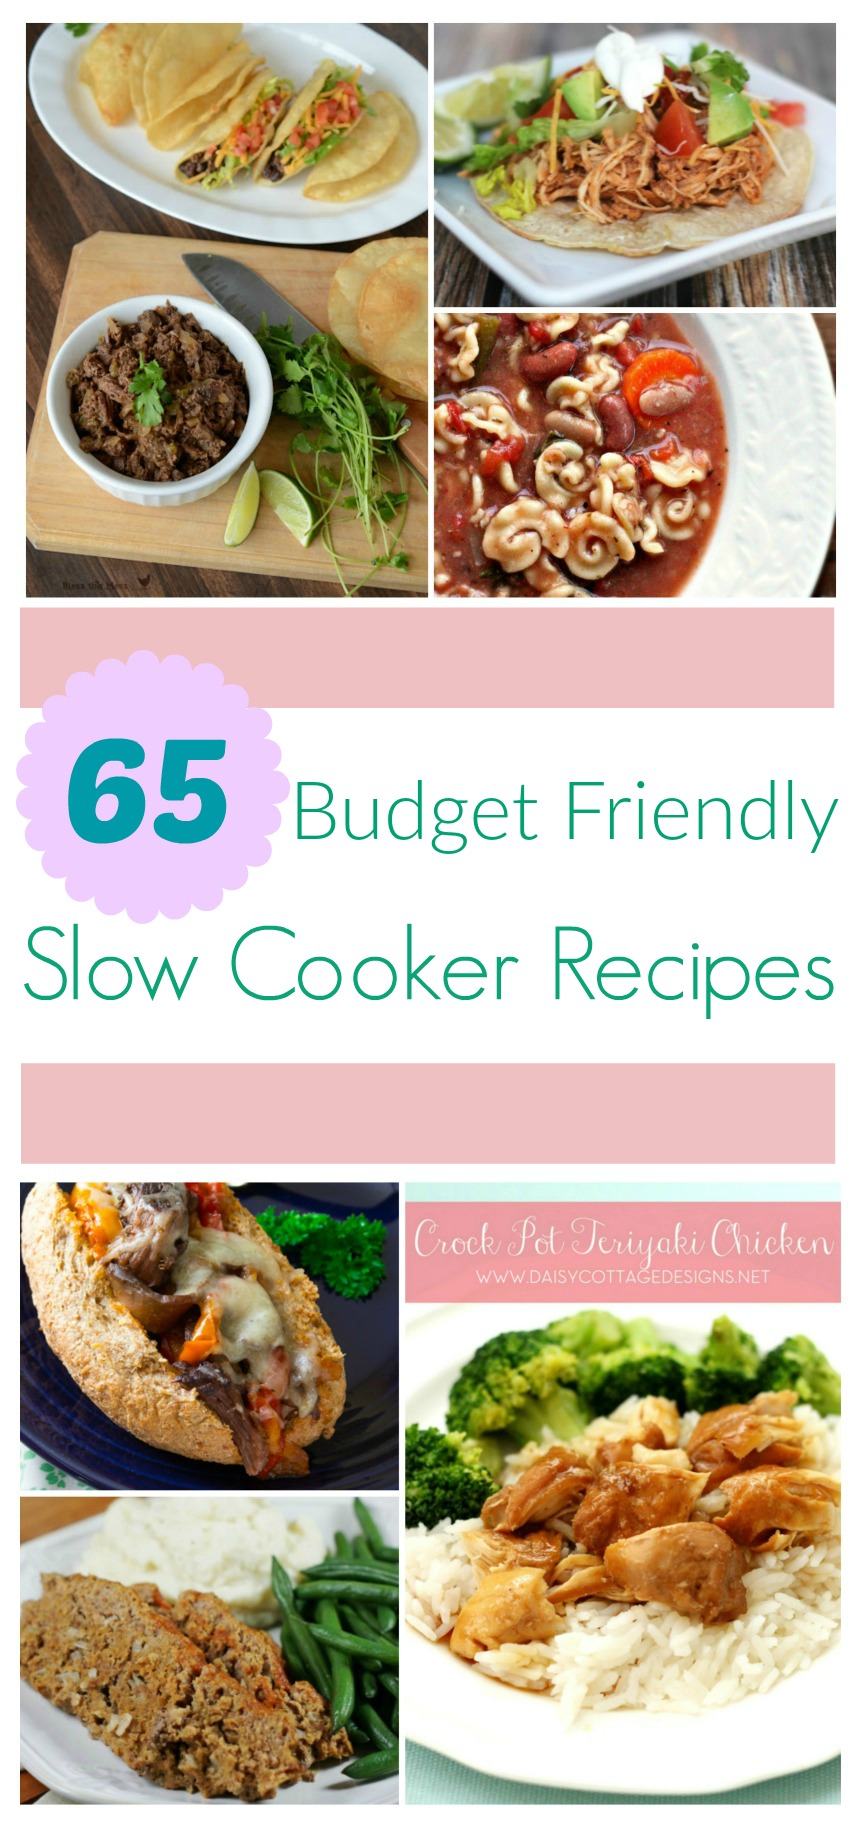 Looking for inexpensive slow cooker recipes that are very budget friendly? Check out our 65 Budget Friendly Slow Cooker Recipes Round Up here!